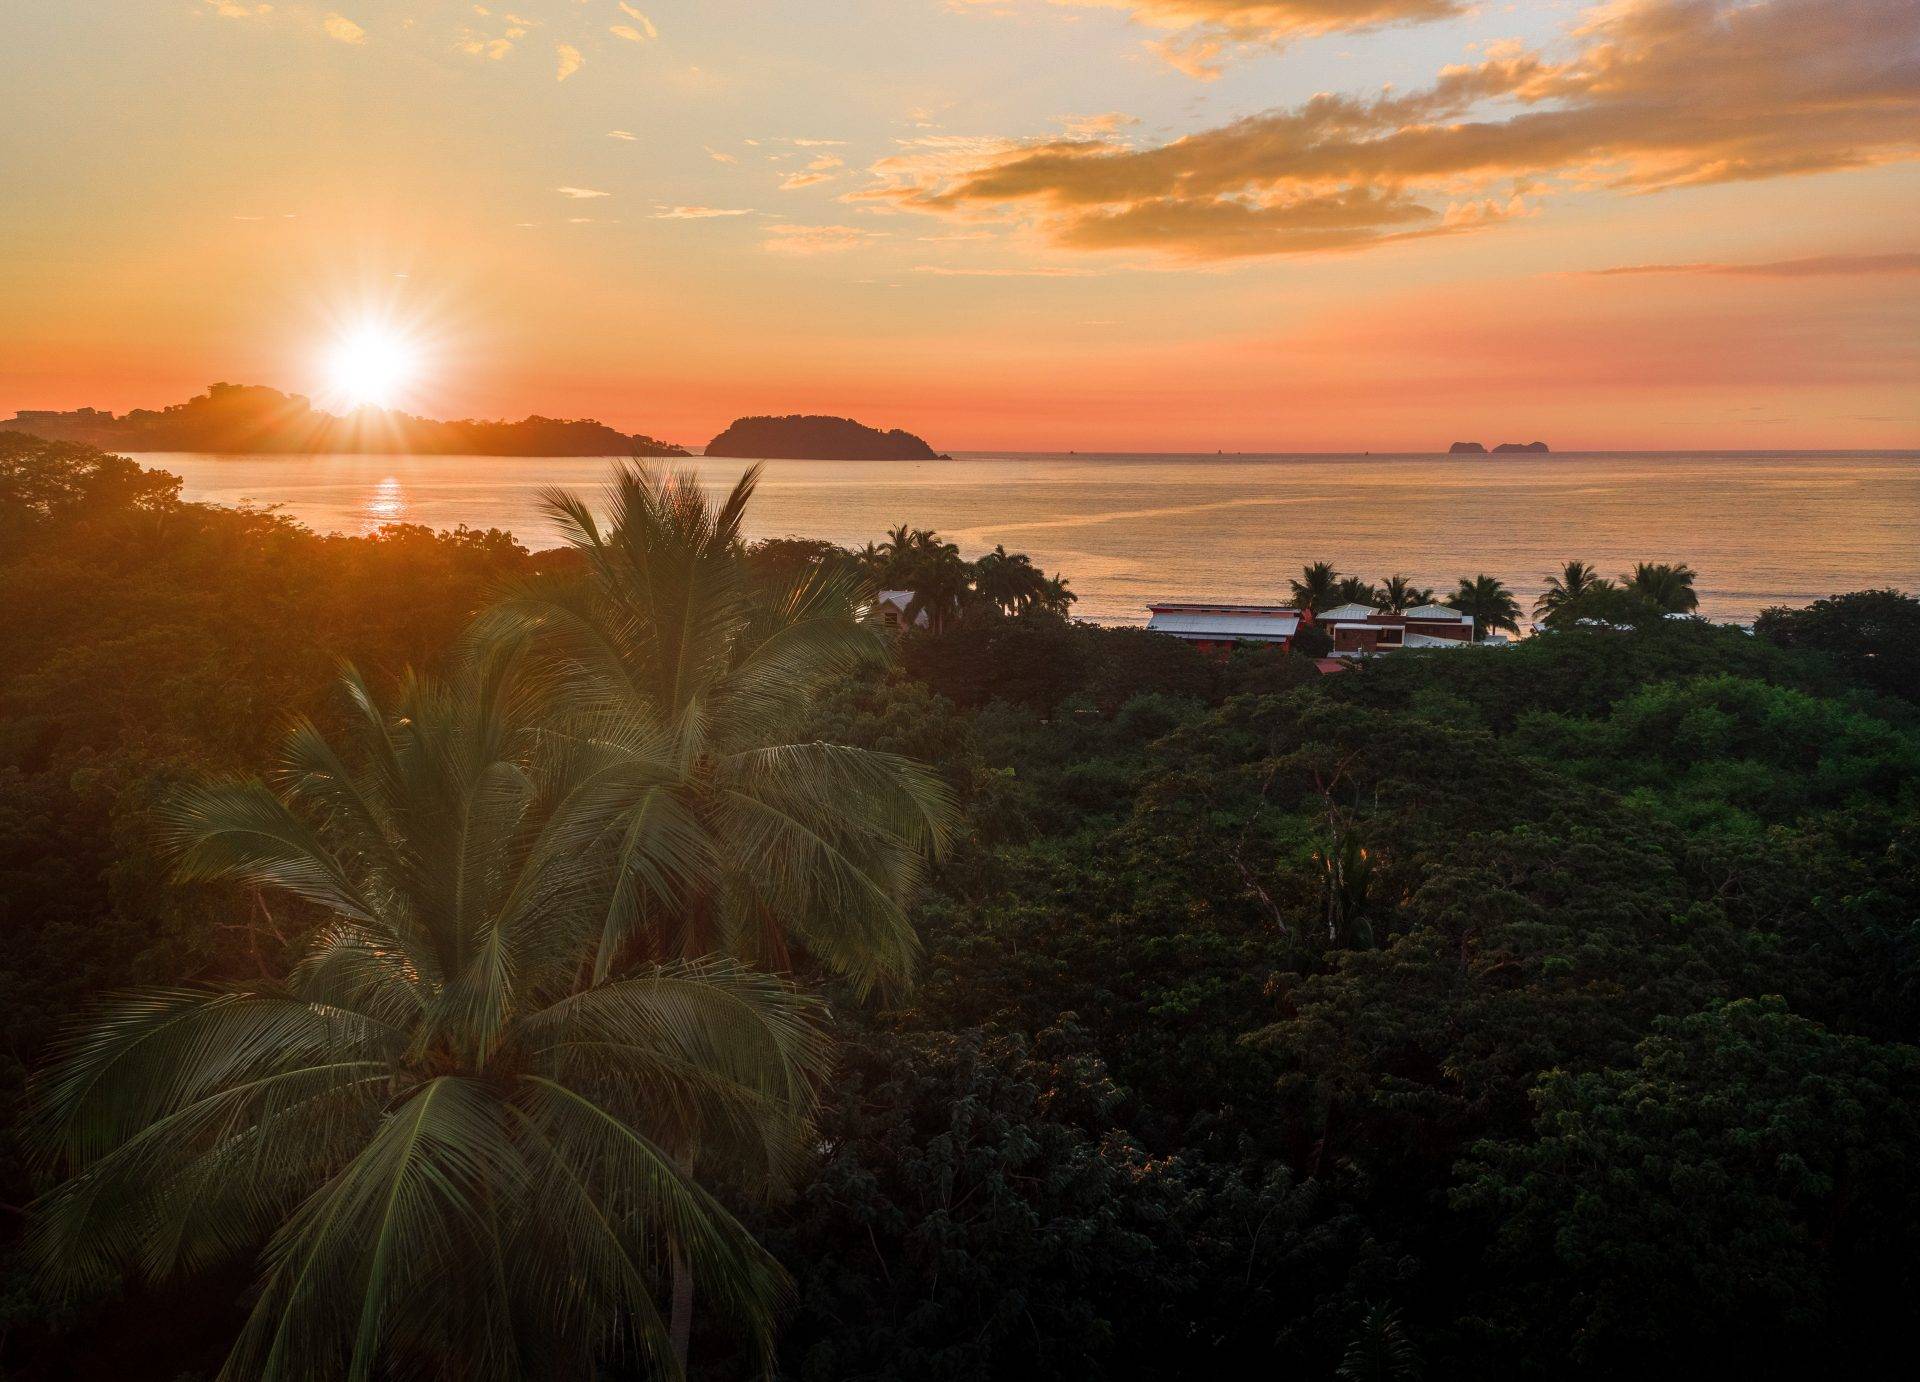 scenic beauty among top reasons for moving to Costa Rica